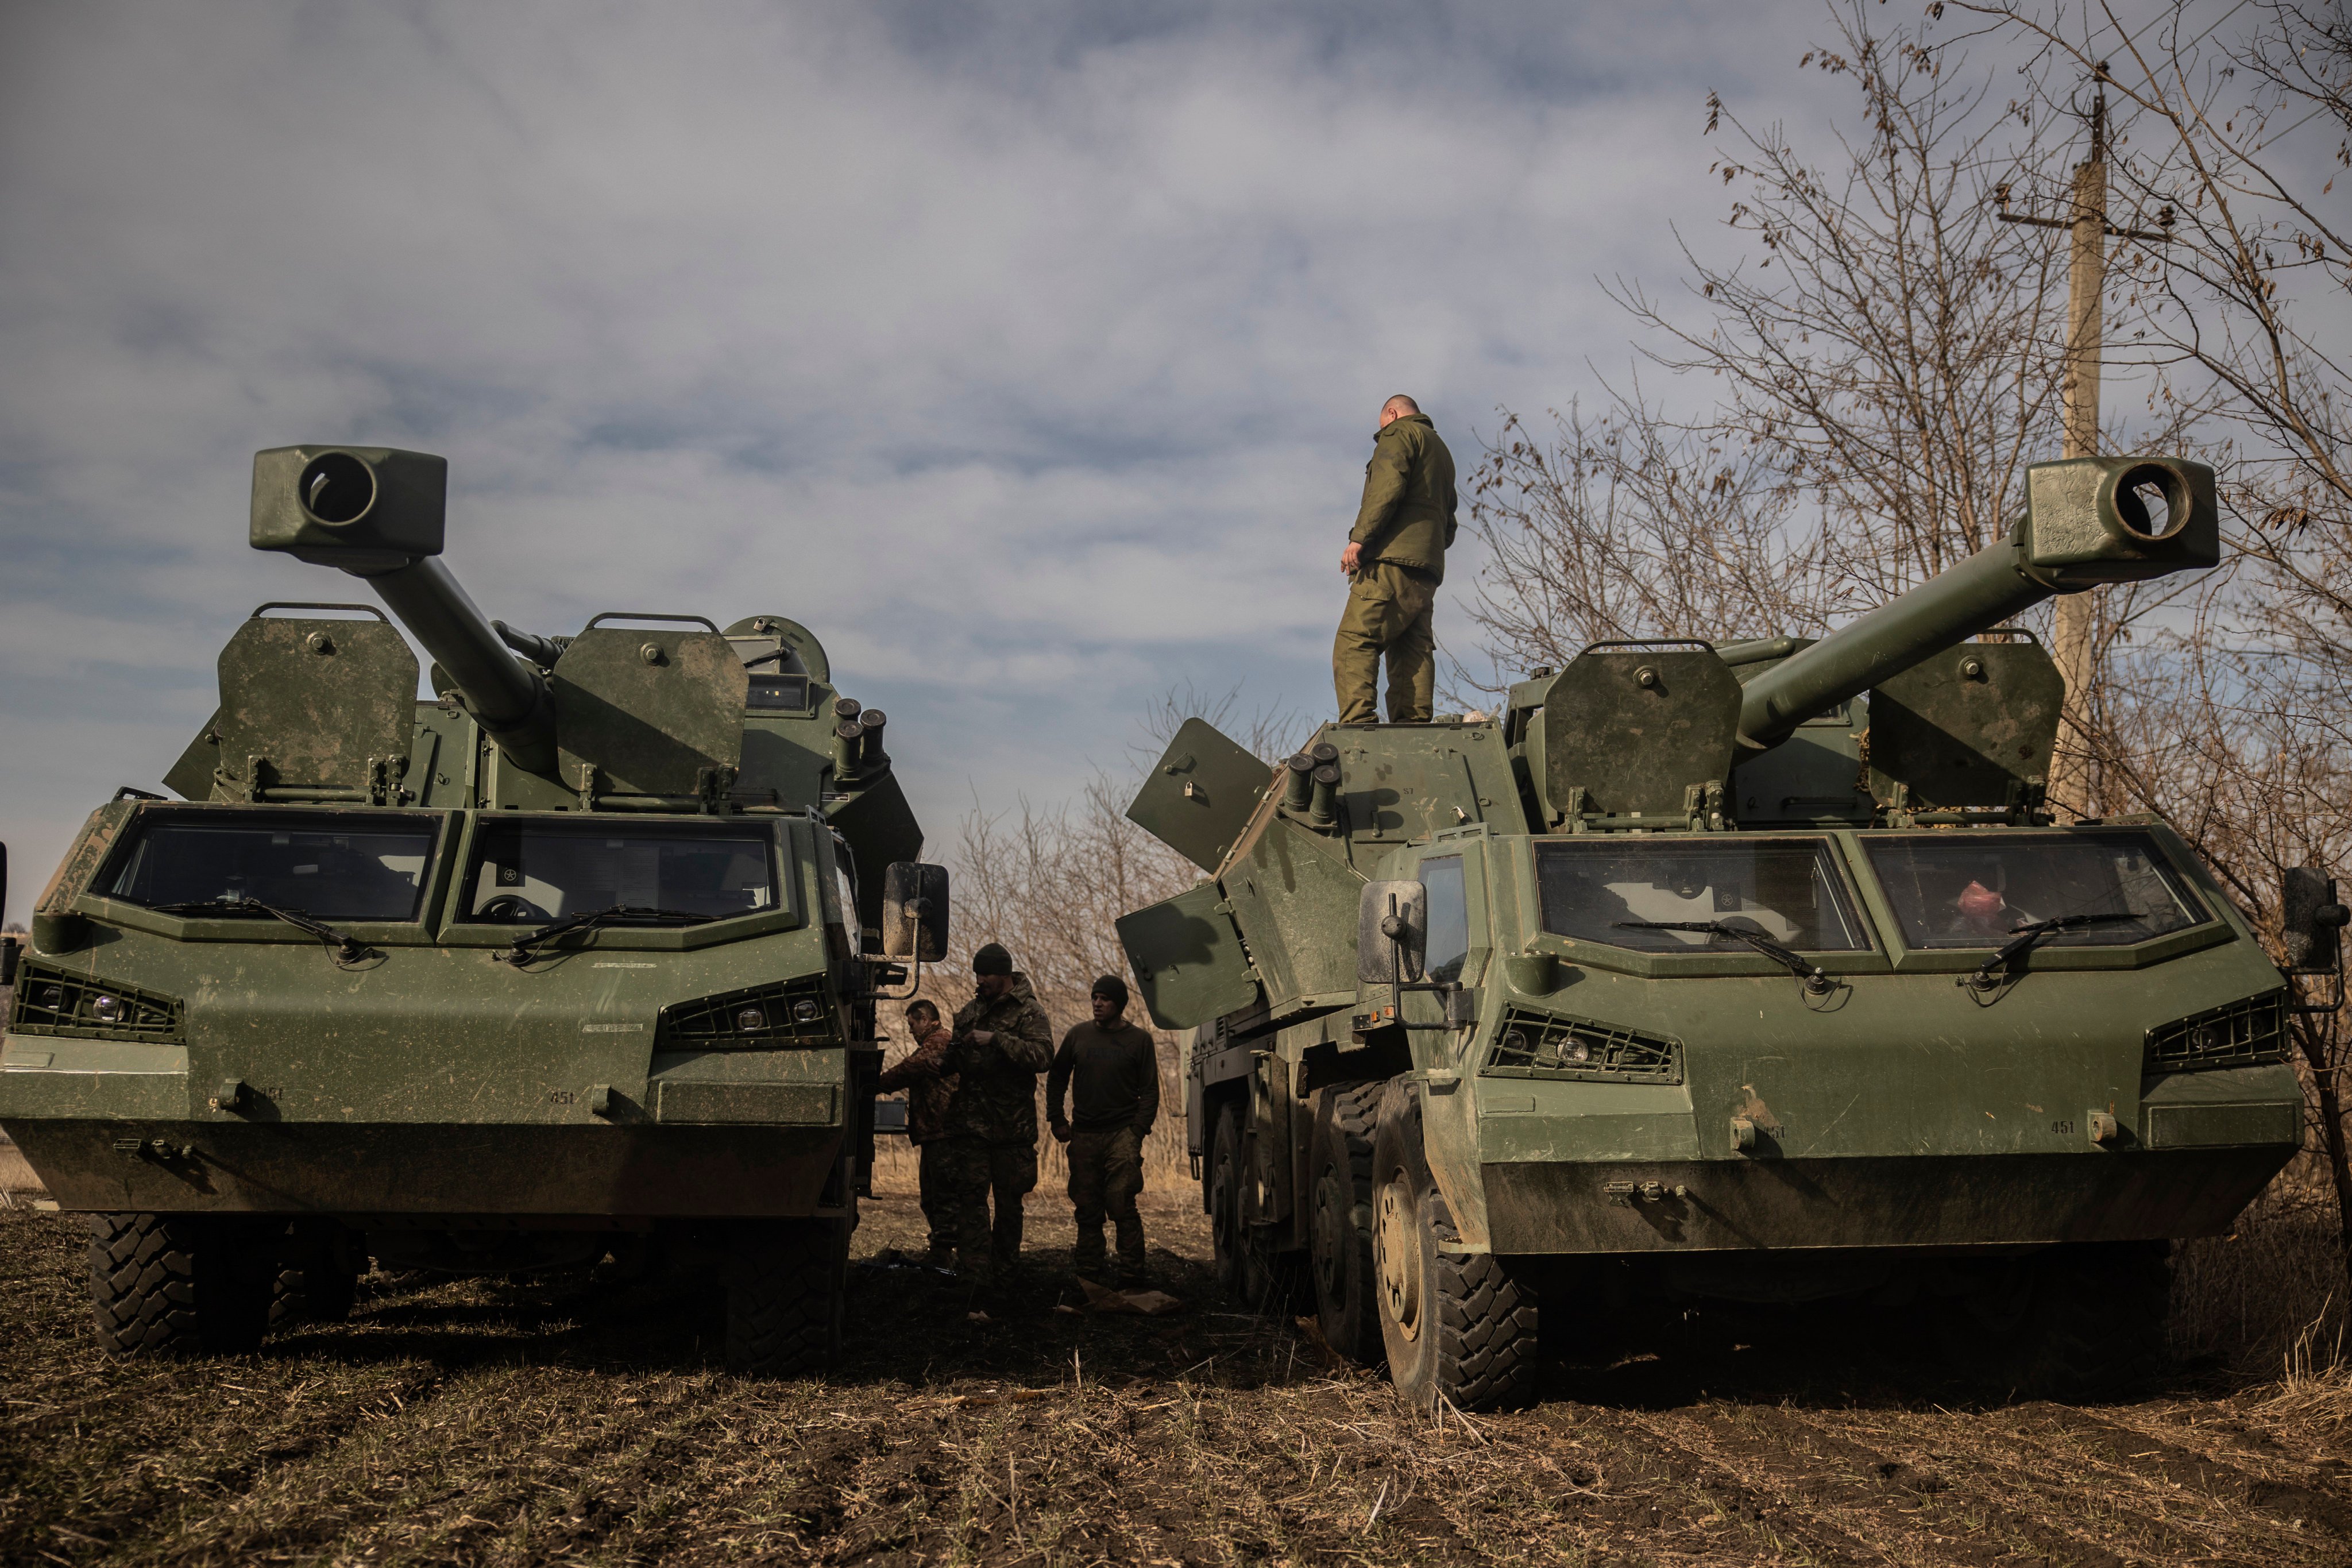 Ukrainian soldiers in the Donetsk region prepare 152mm self-propelled howitzers to fire at Russian positions last month. Photo: AP 